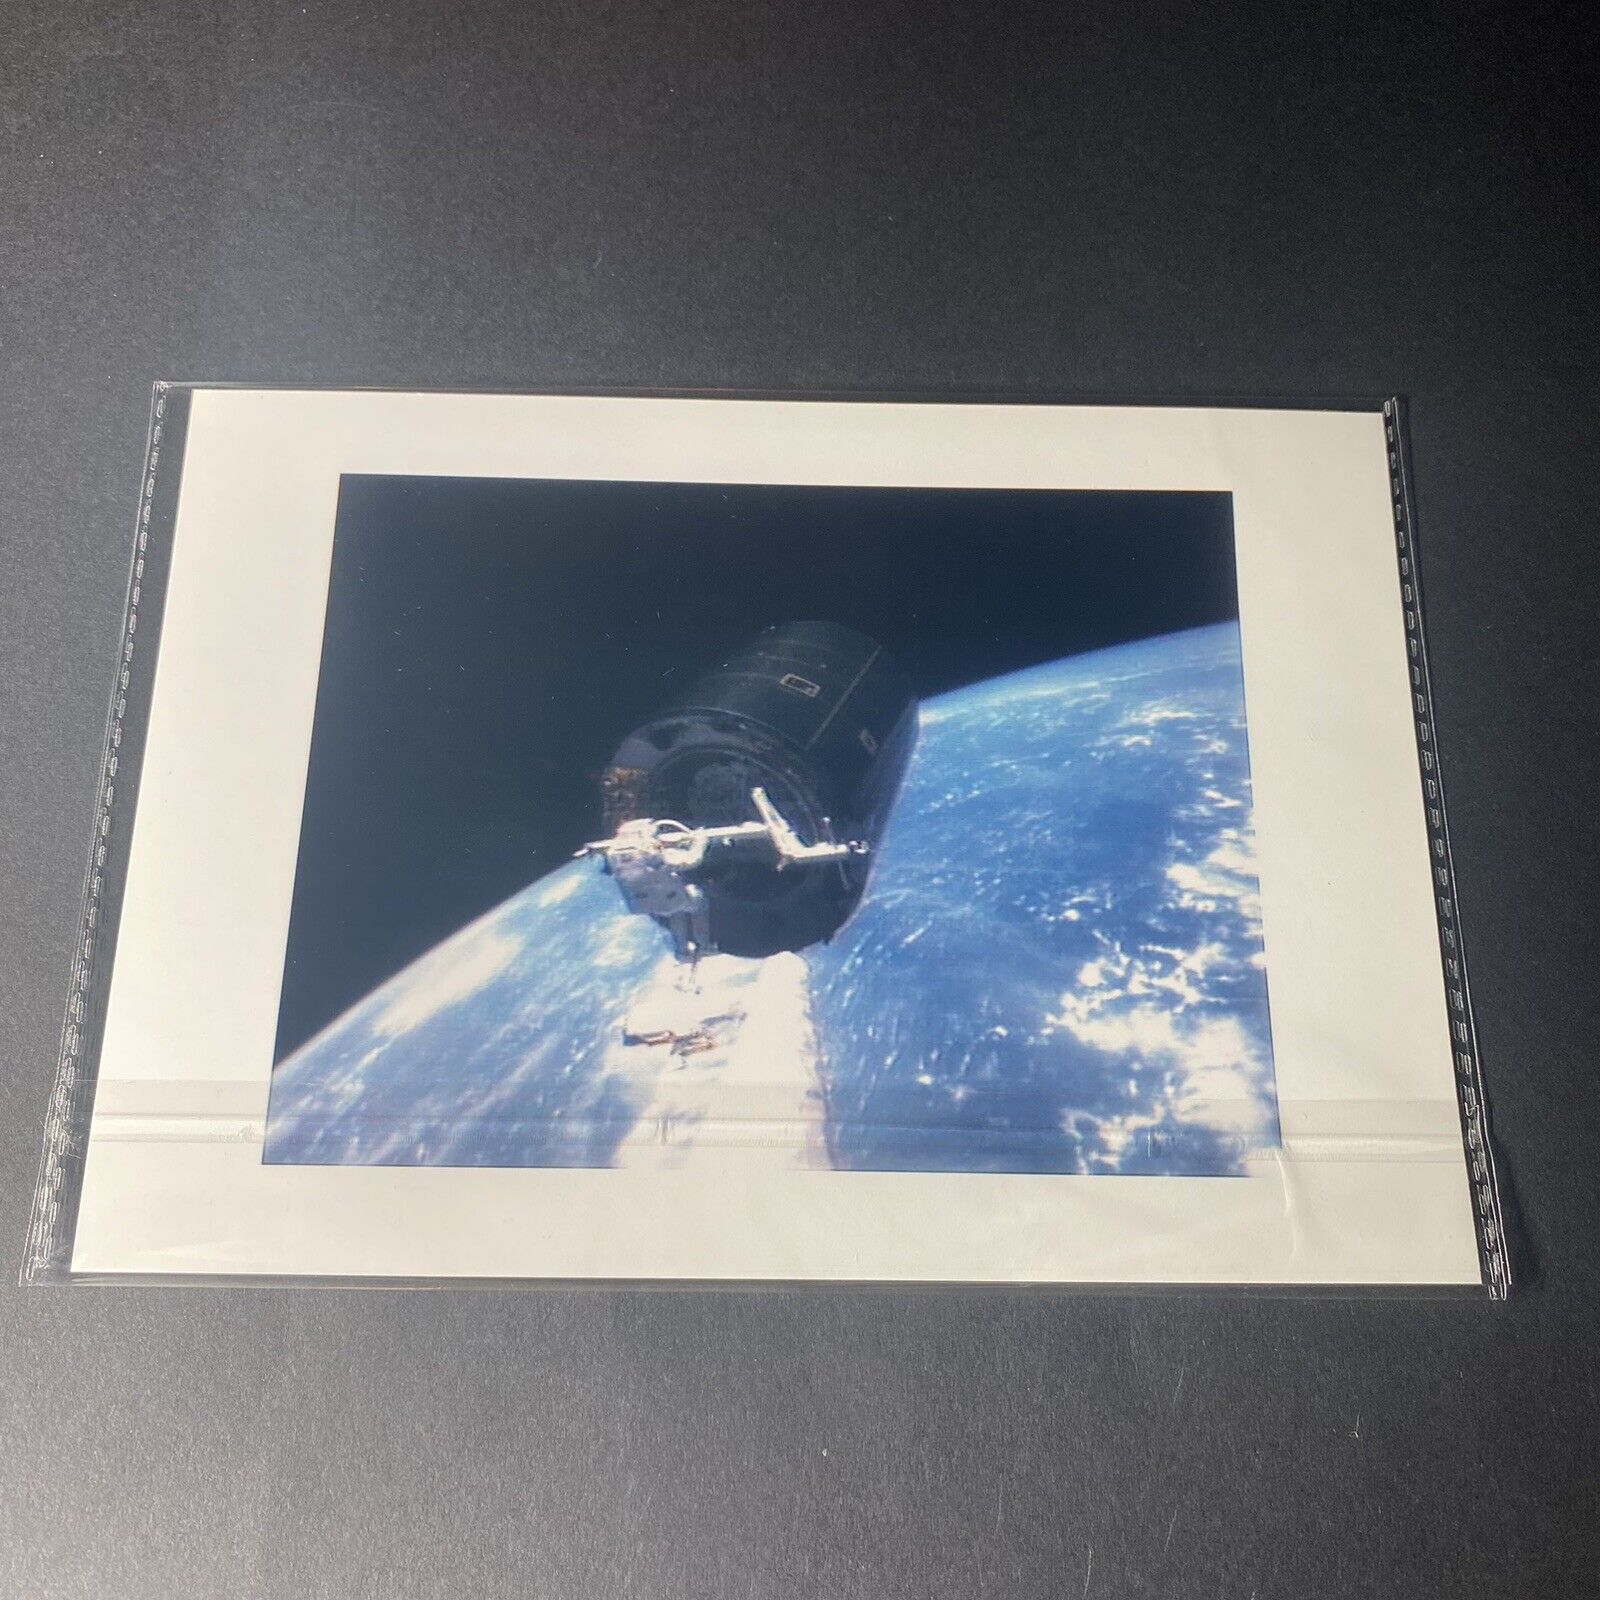 Official NASA 8x6 Sony Photo 1992 STS-49 Onboard Thornton Astronaut Space Walk